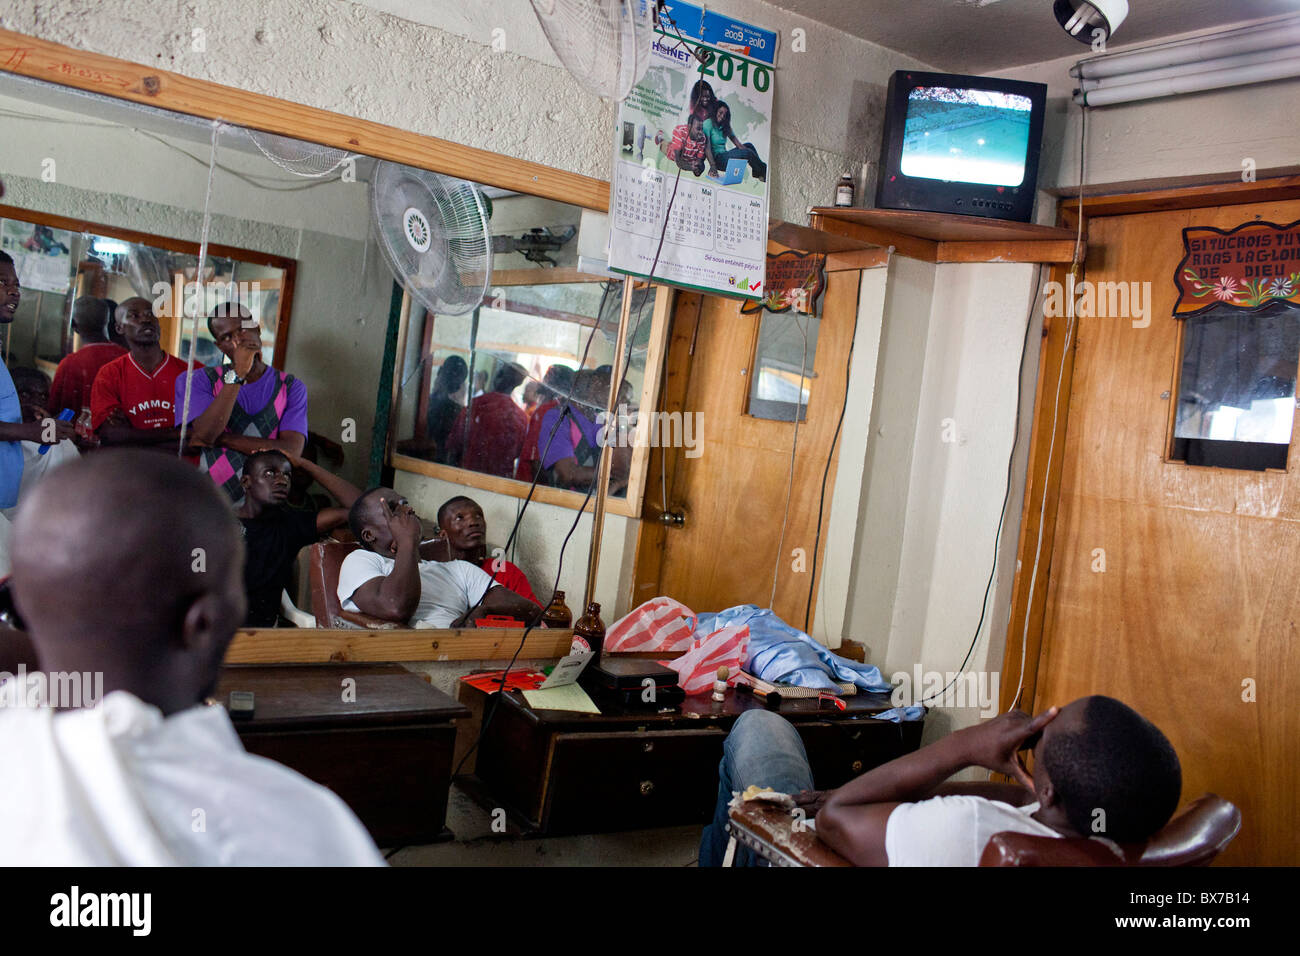 Men in a barber shop watch Spain play the Netherlands in the World Cup final on July 11, 2010 in Port-au-Prince, Haiti. Stock Photo